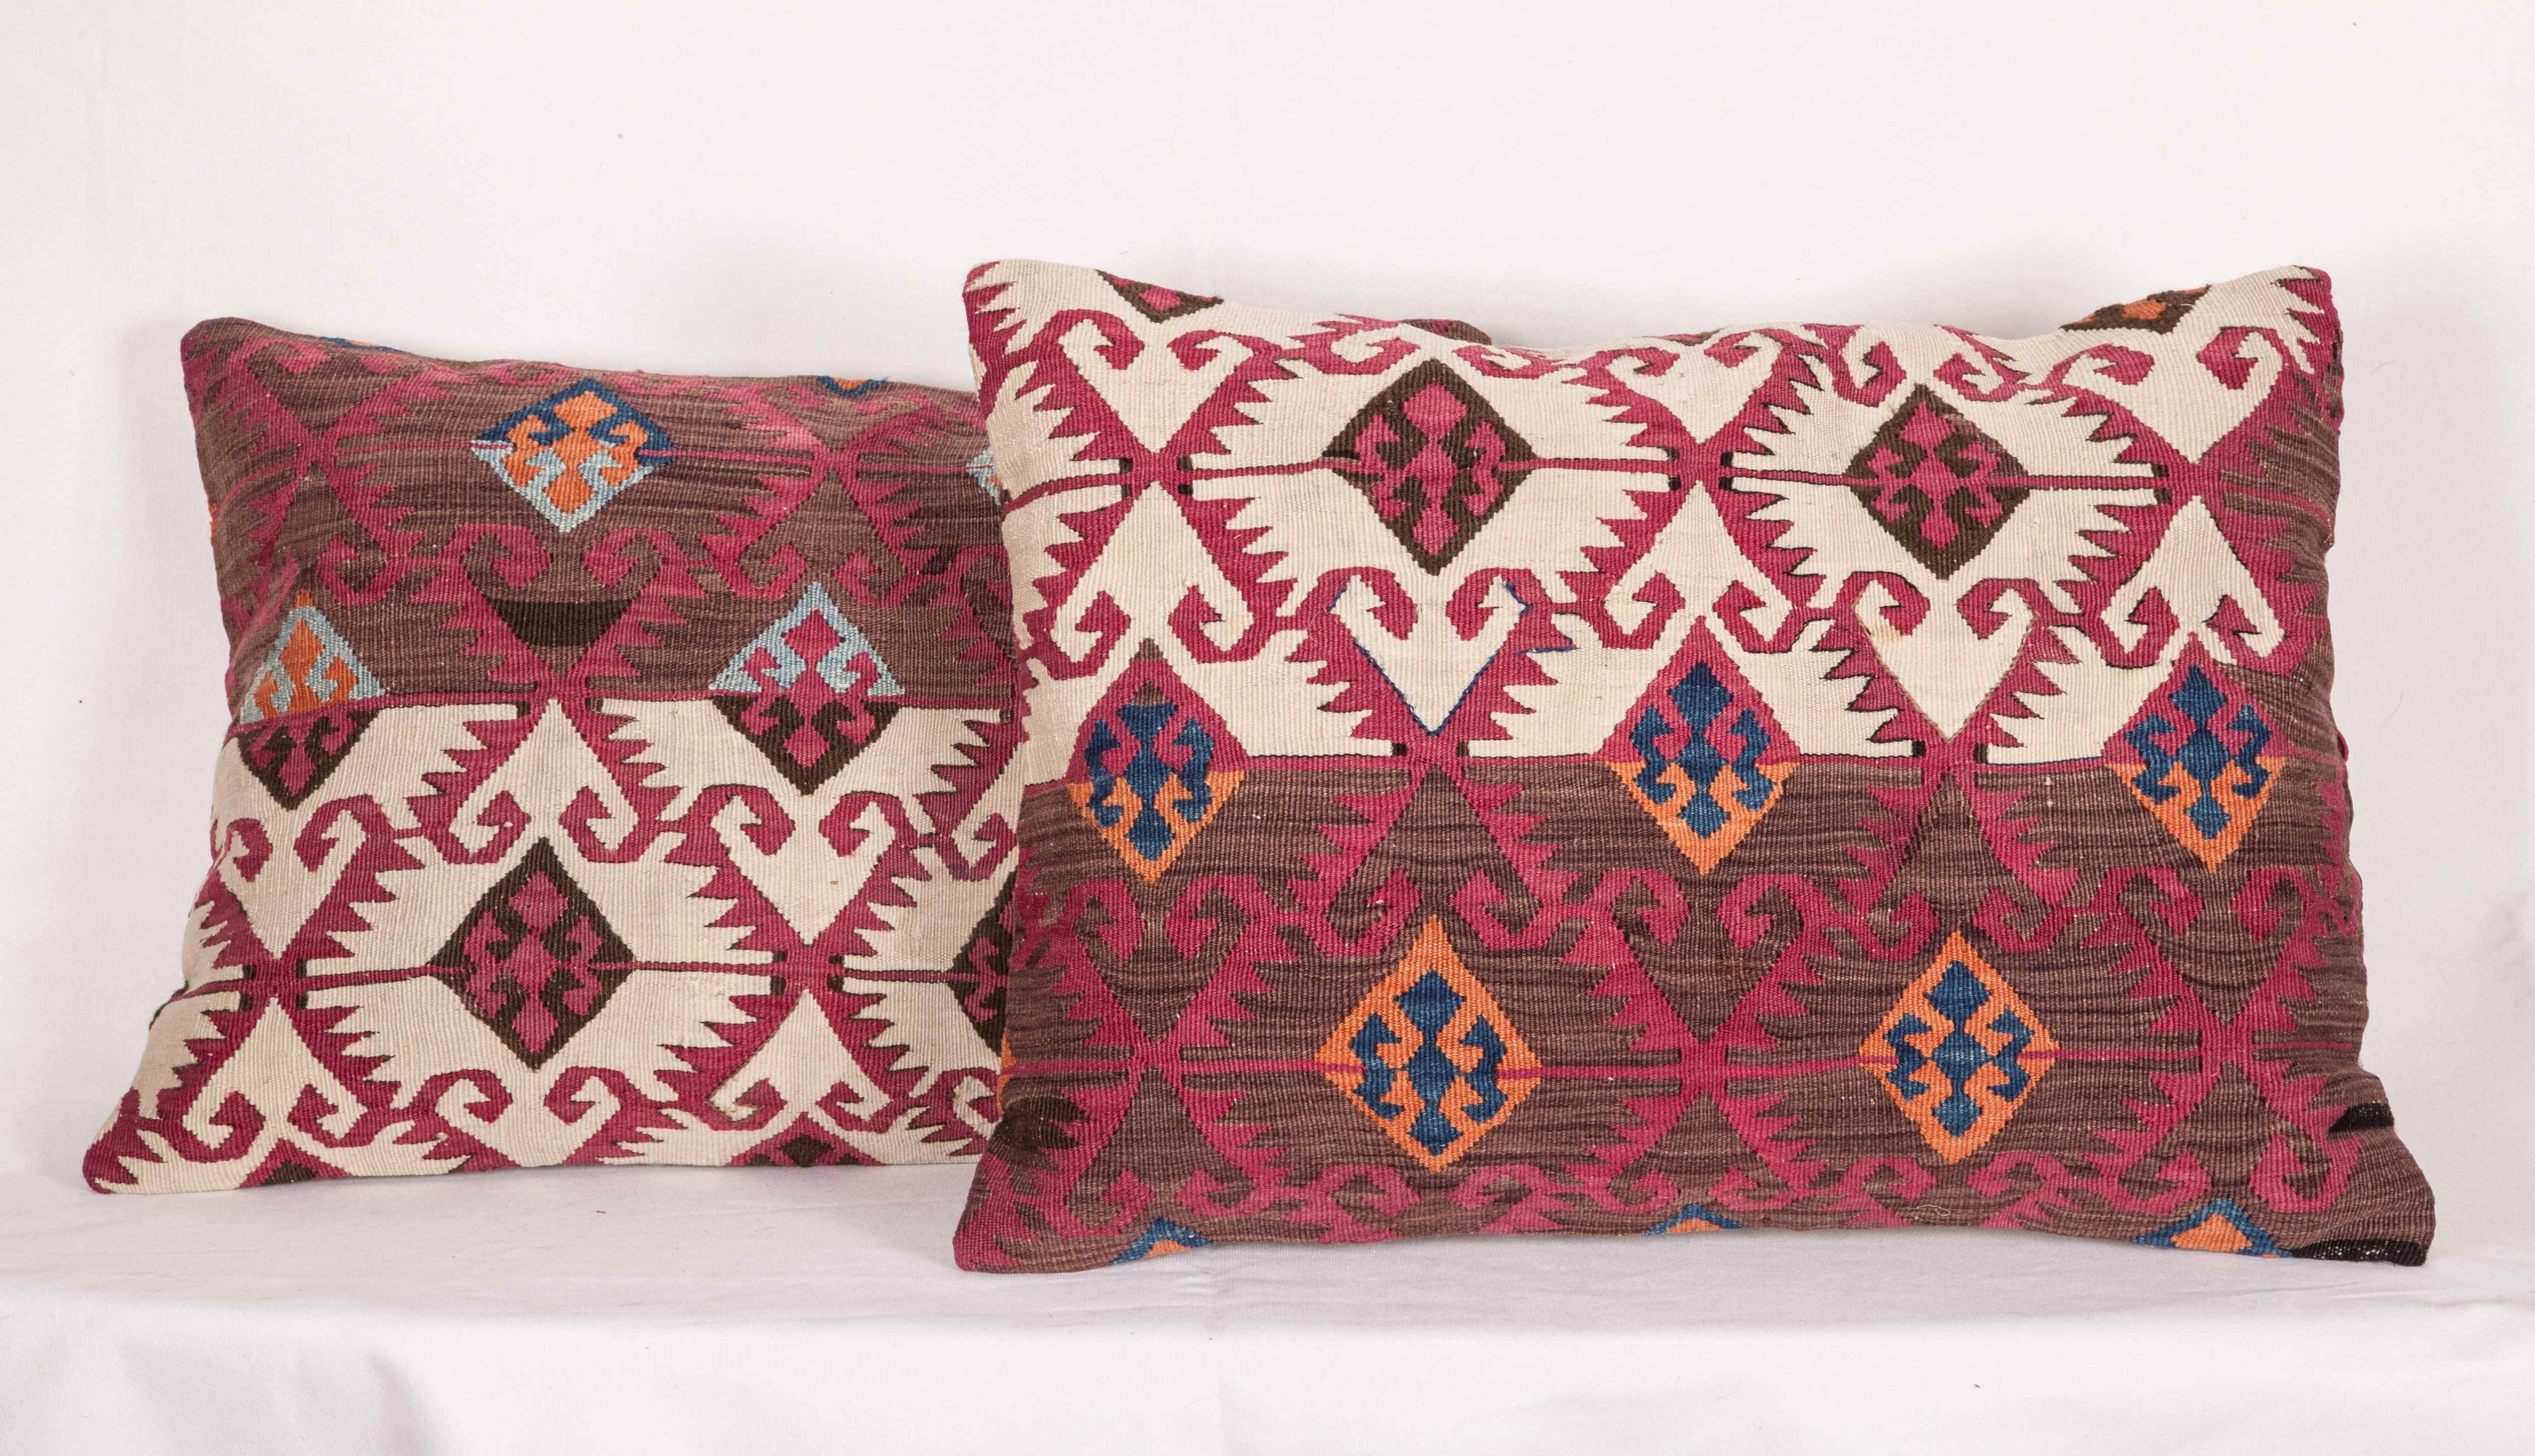 Woven Antique Pillows Made Out of a 19th Century Anatolian Kilim Fragment